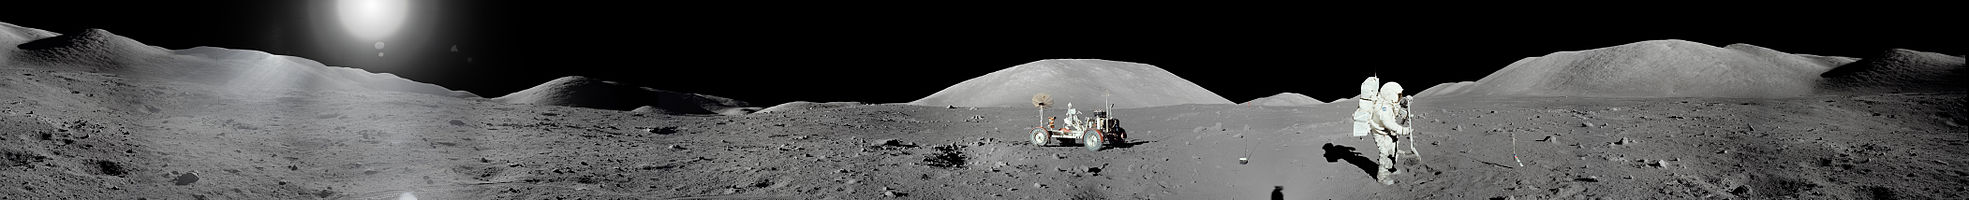 Panorama of the moon taken during mission Apollo 17 (Station 1 East)